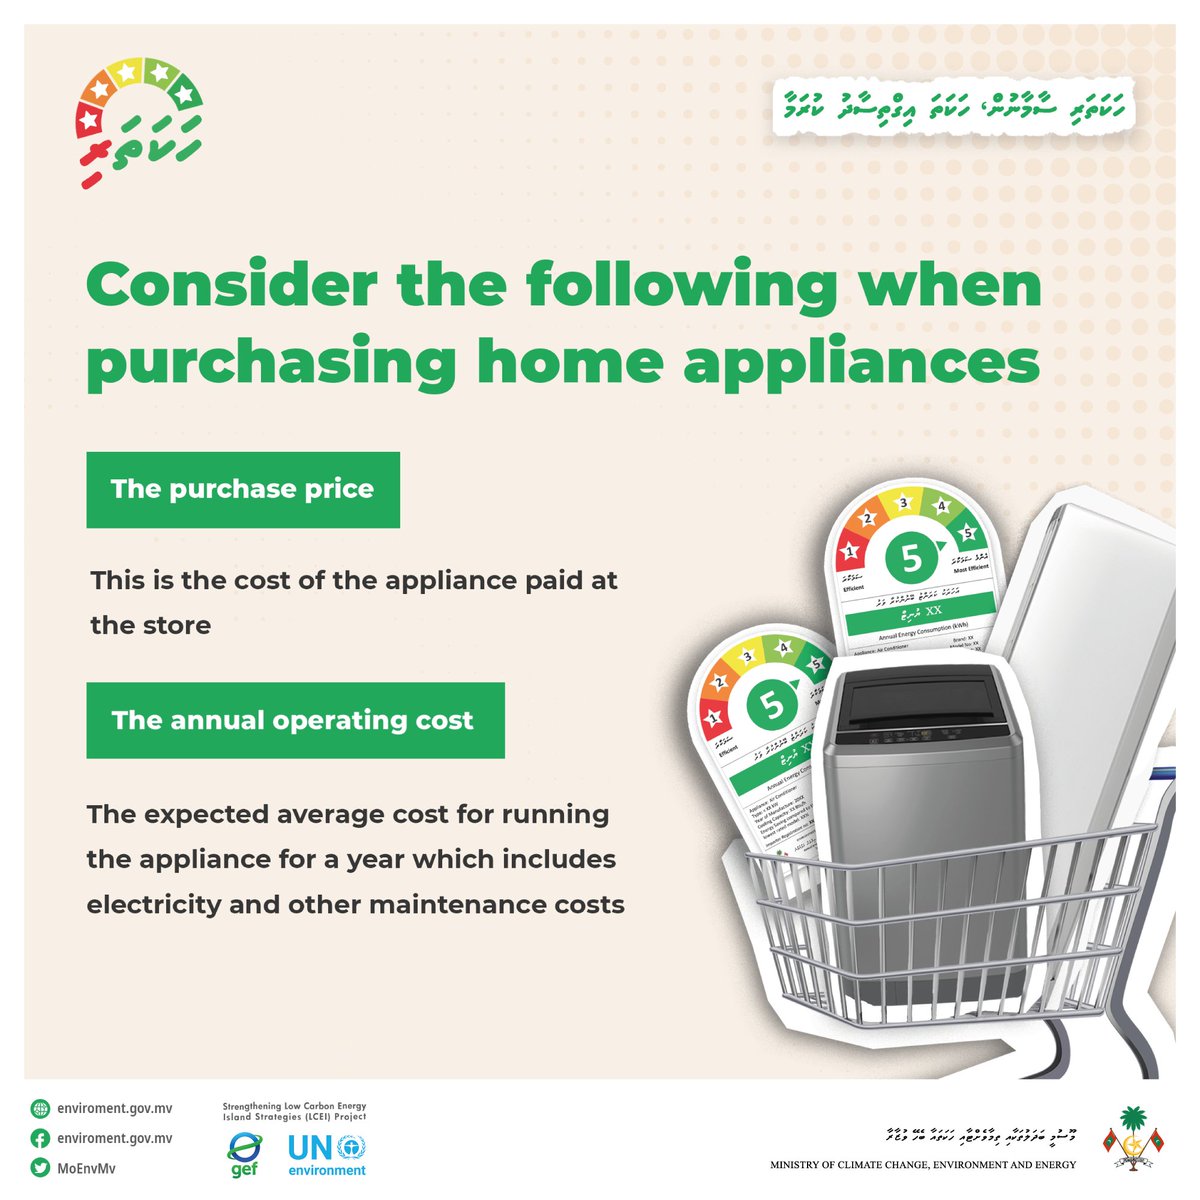 When purchasing home appliances, consider Hakathari labeled appliances to reduce annual operating cost! For more information on Hakathari appliances: environment.gov.mv/v2/en/hakathar… #hakathari #hakathasamakaara